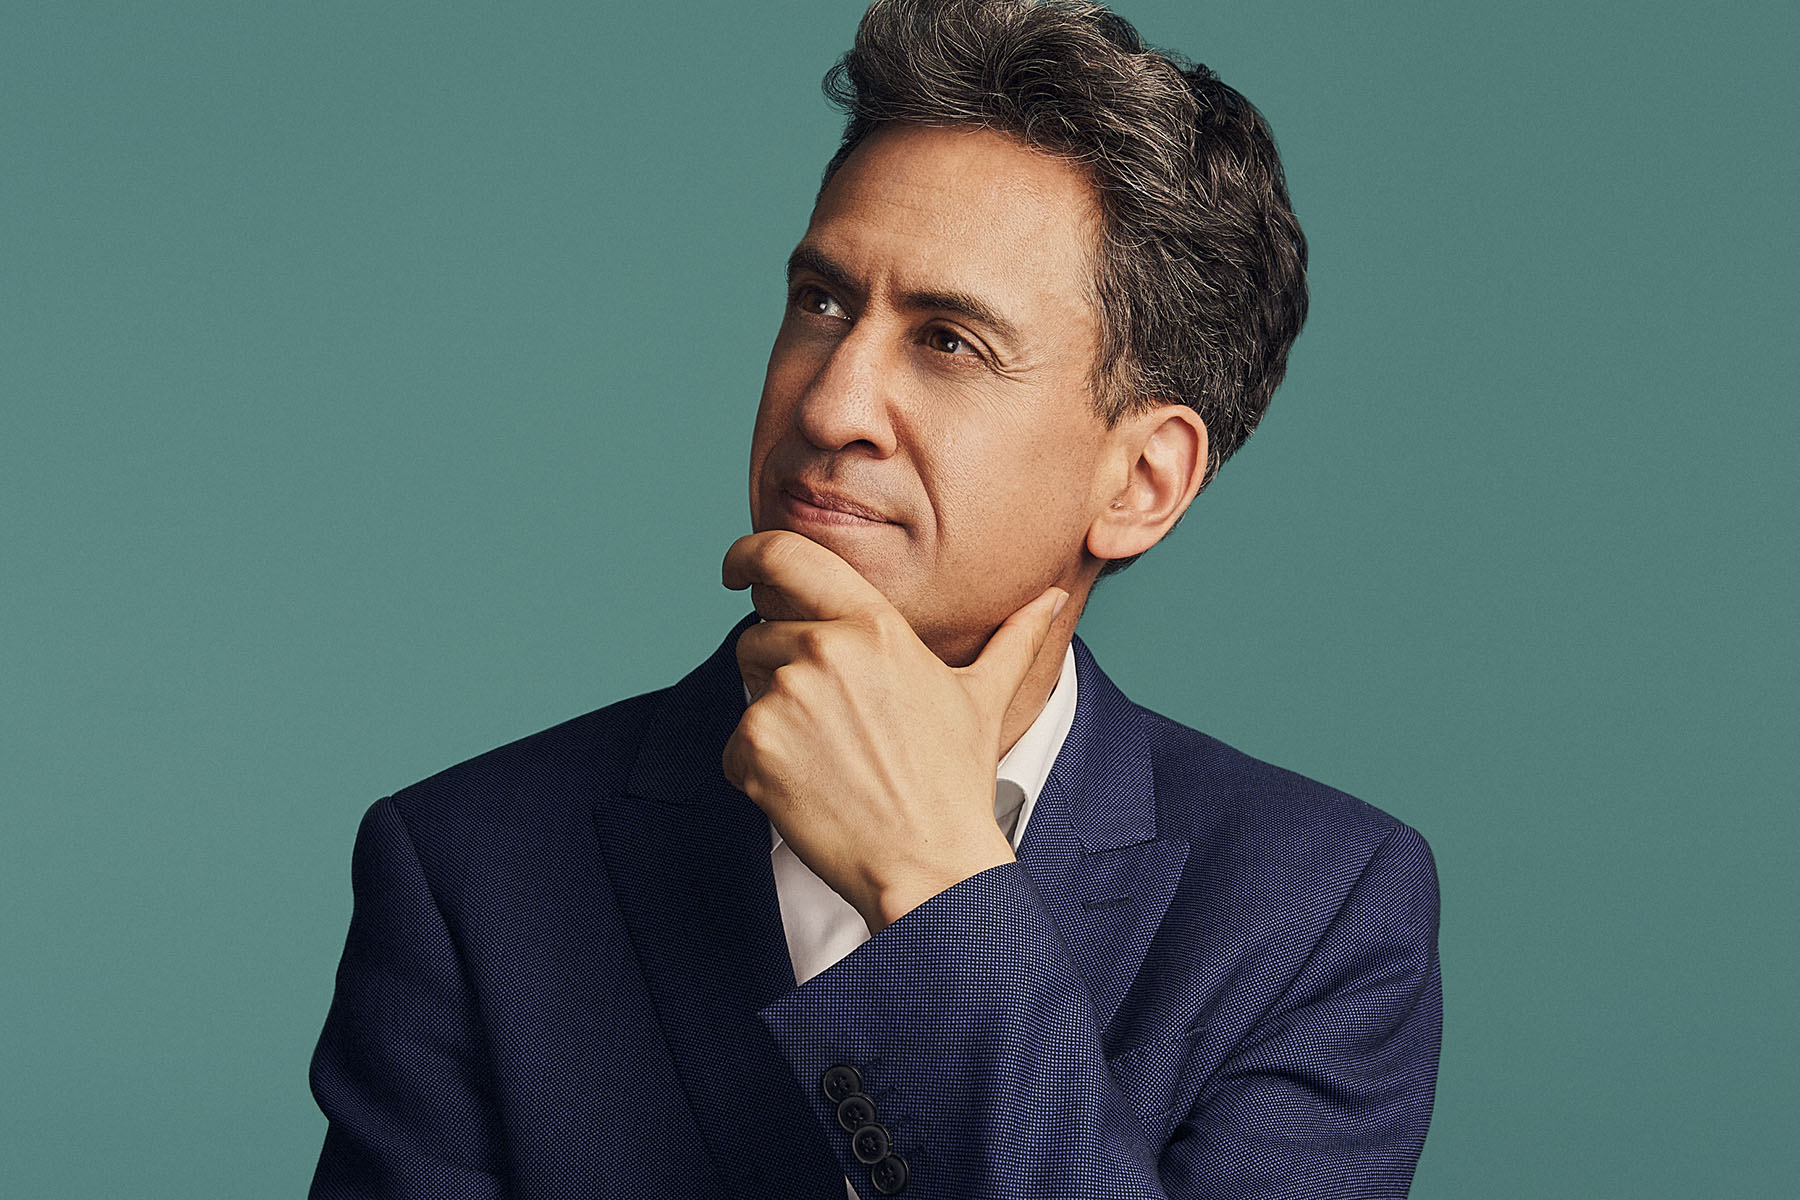 A portrait of Ed Miliband against a green background